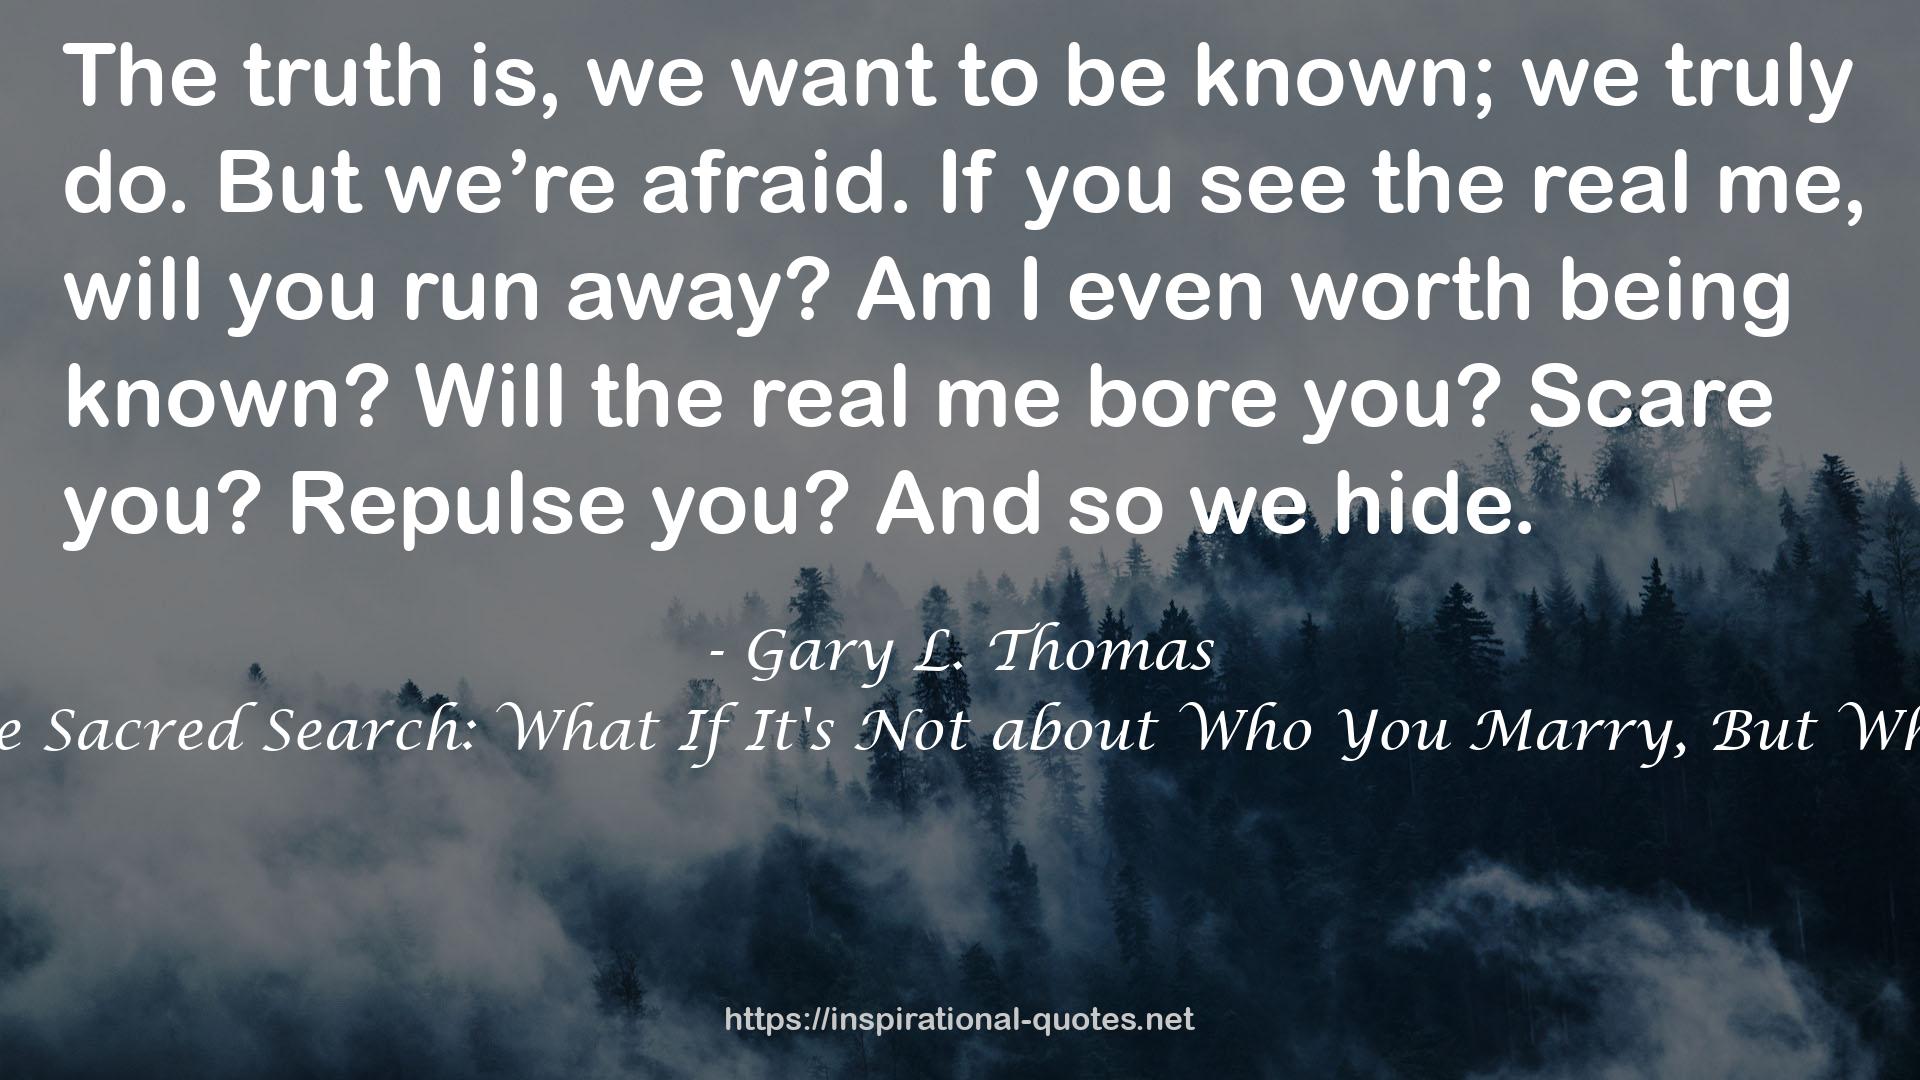 The Sacred Search: What If It's Not about Who You Marry, But Why? QUOTES